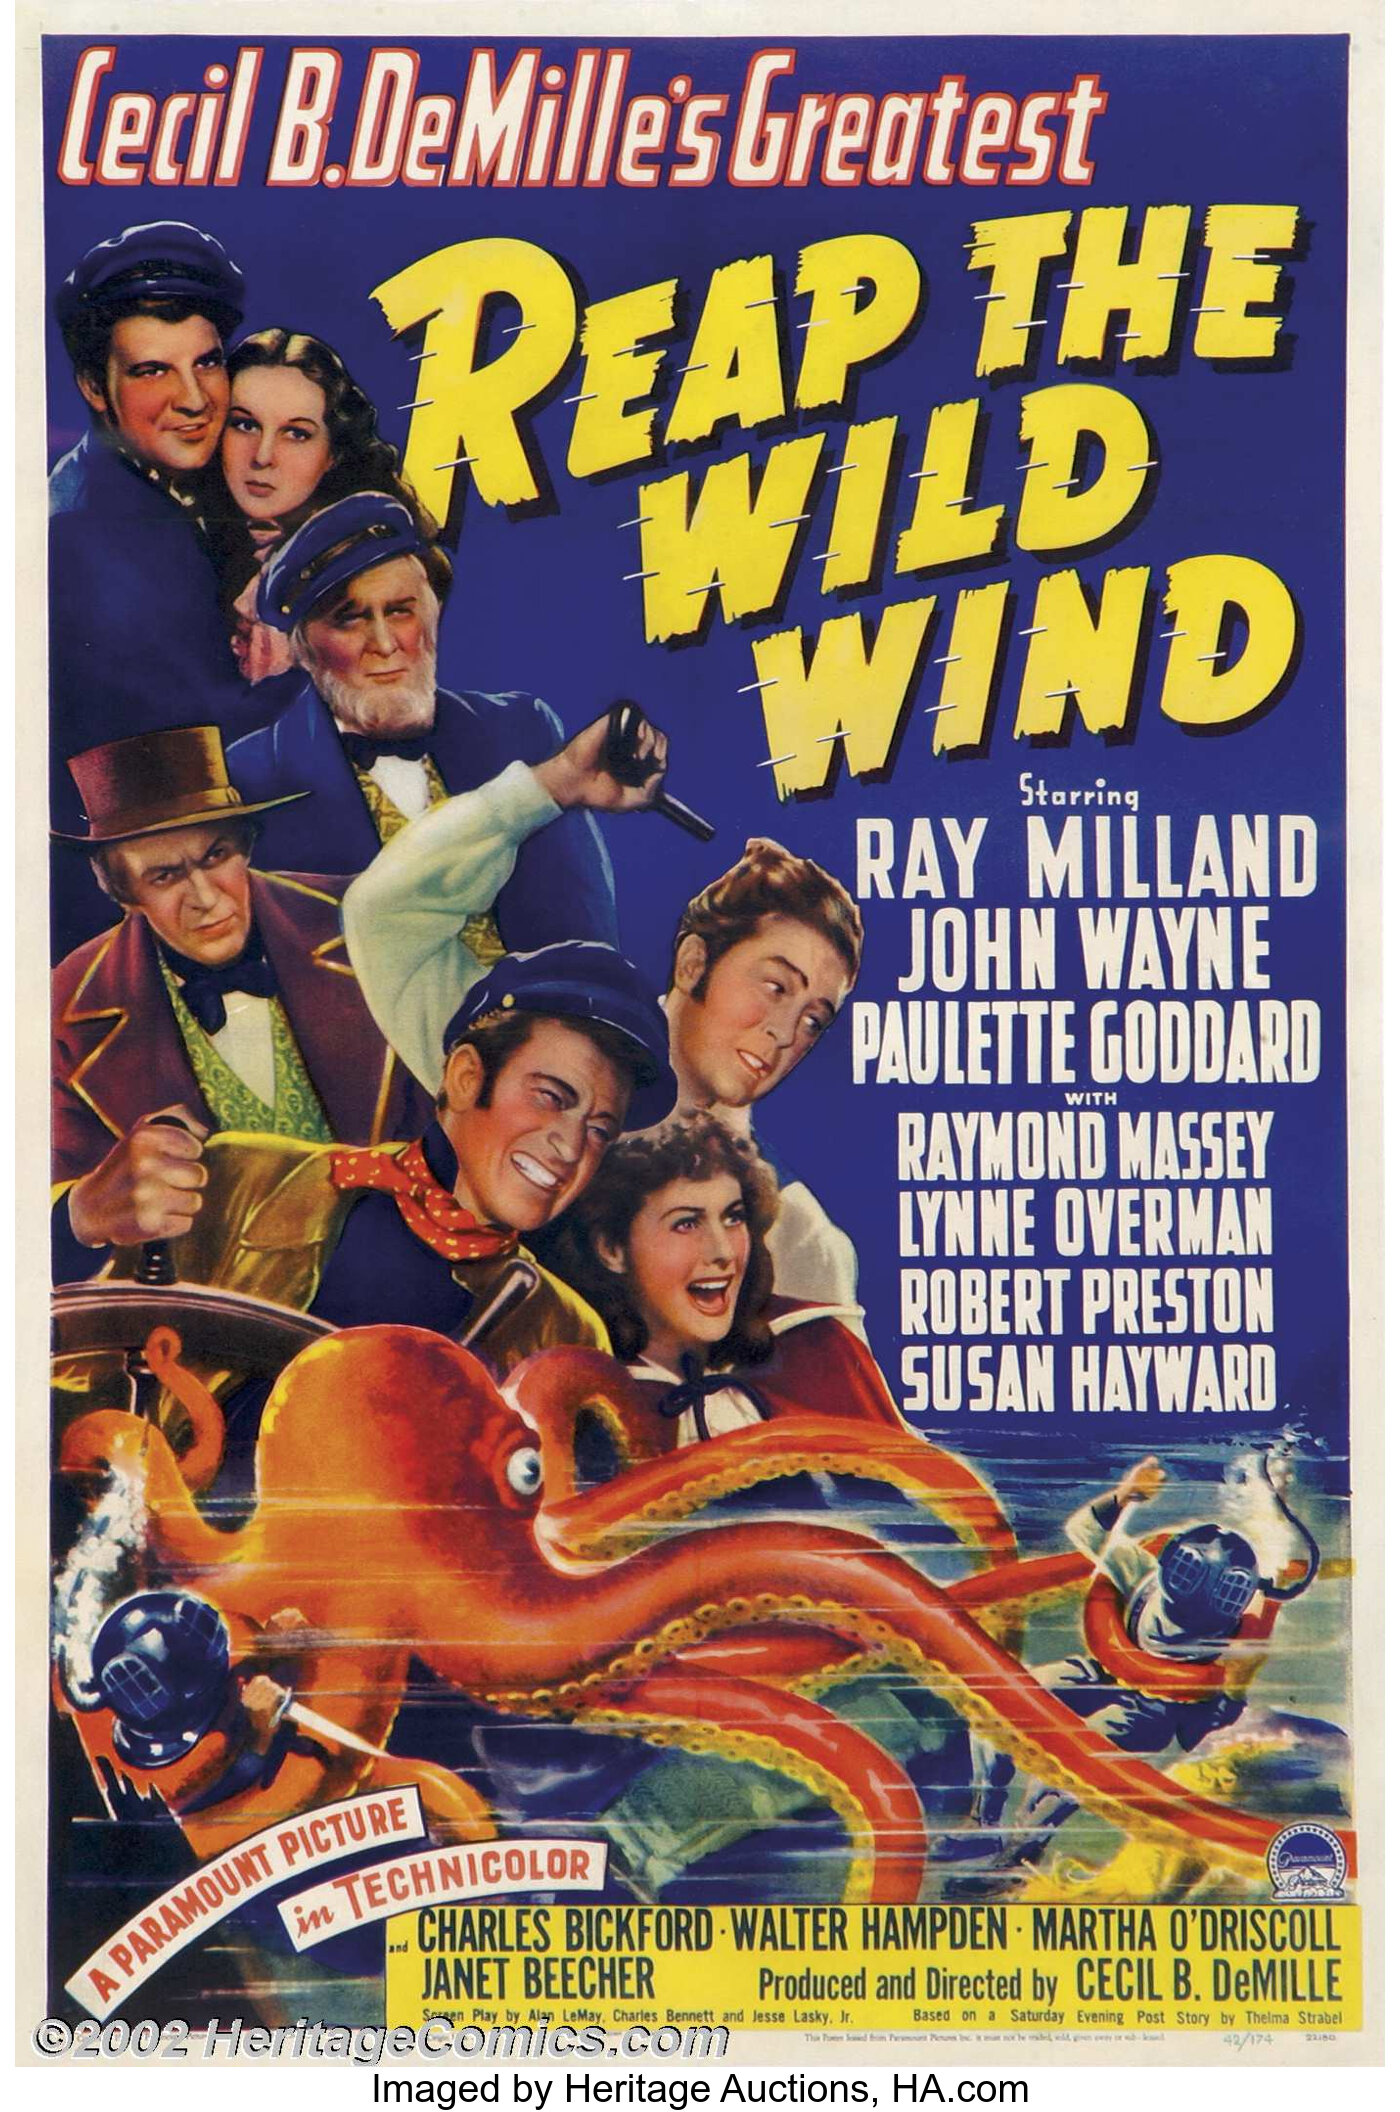 Reap the Wild Wind (Film) - TV Tropes